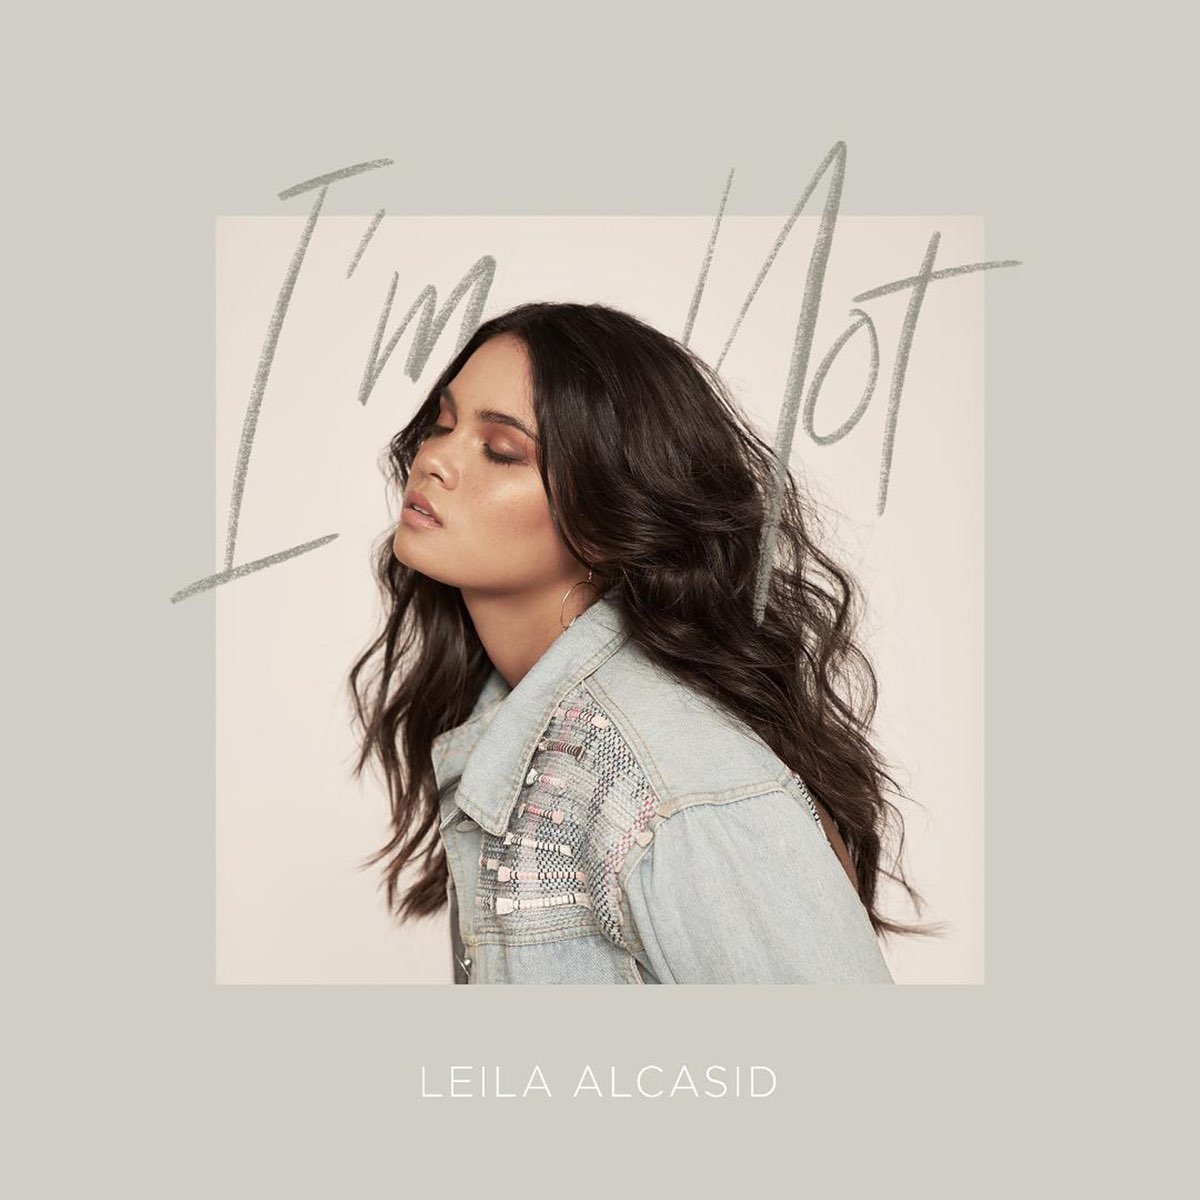 Art for I'm Not by Leila Alcasid